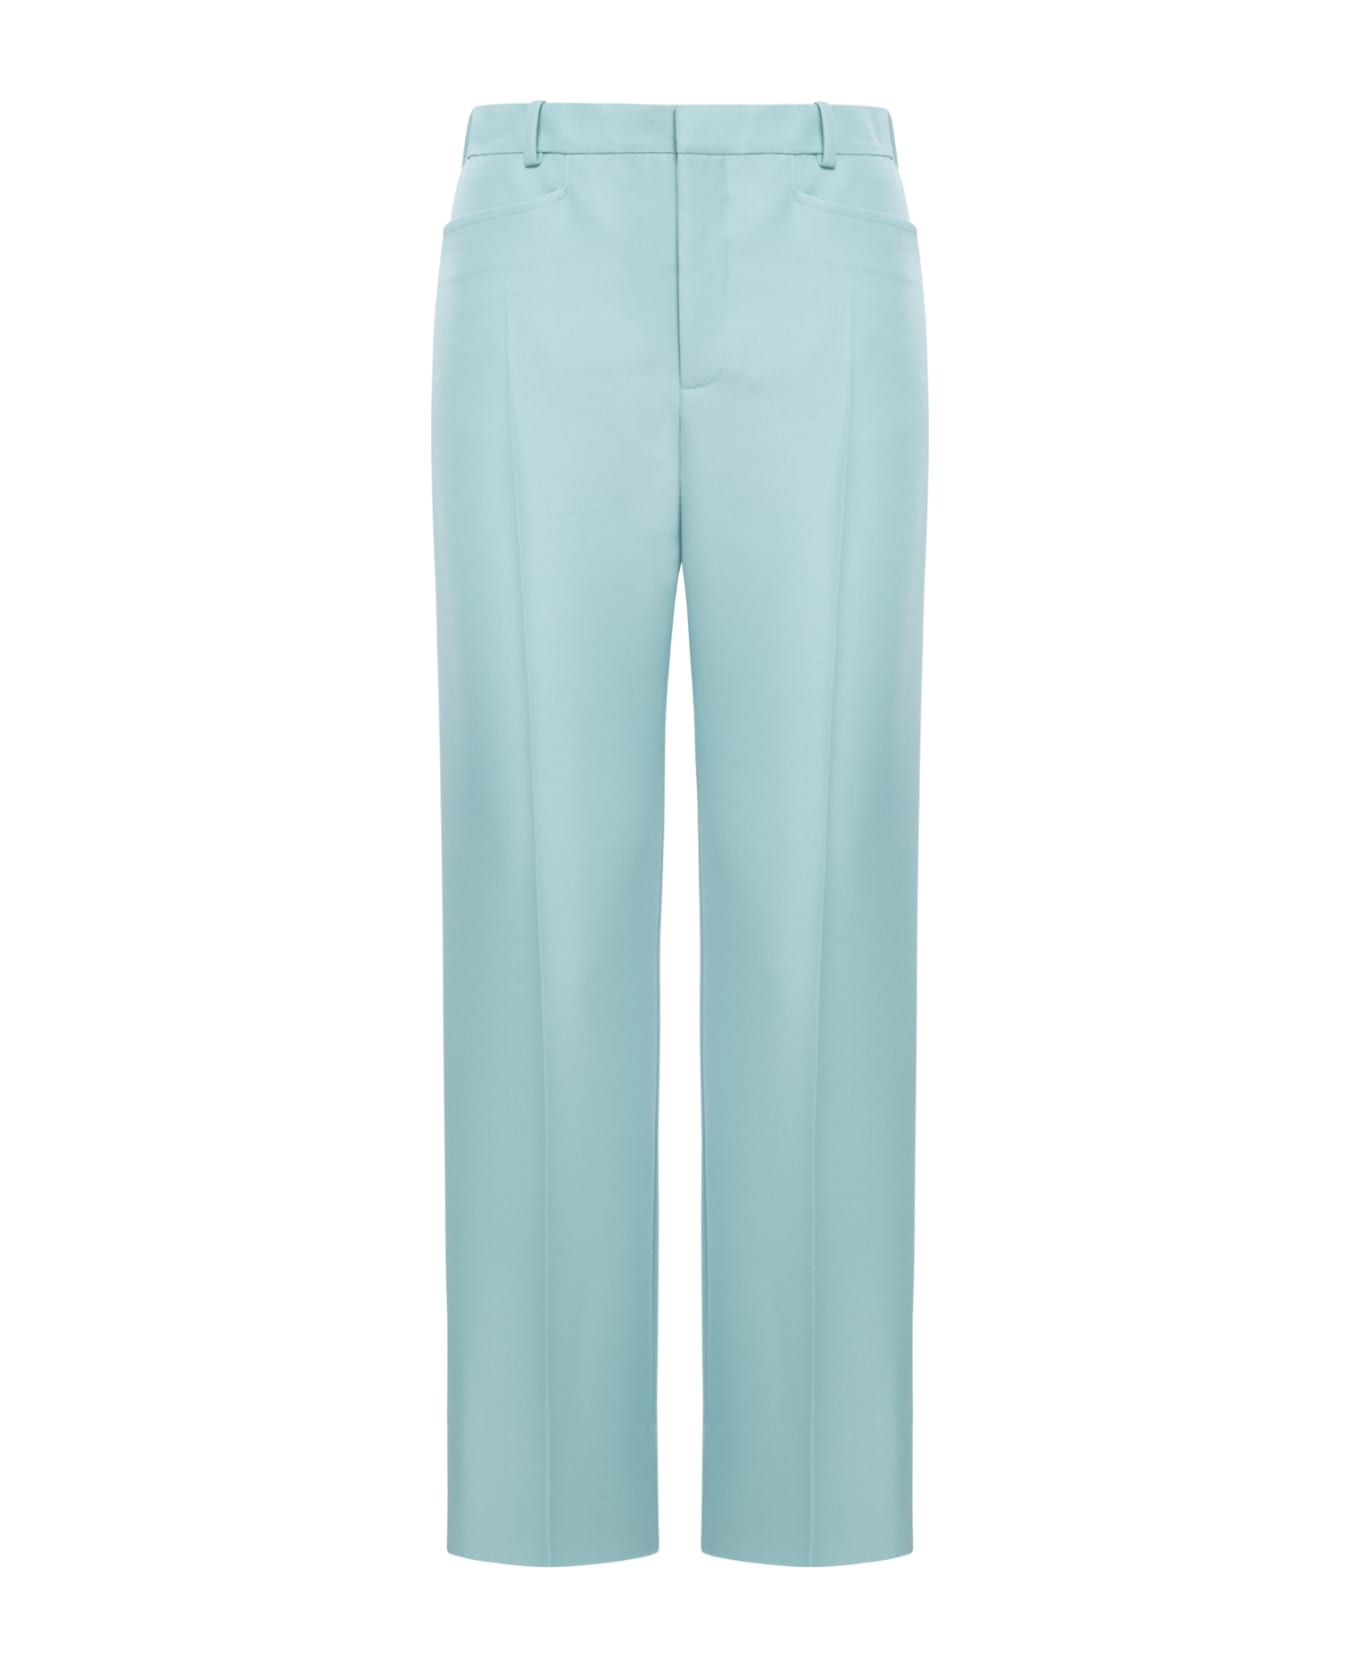 Tom Ford Compact Hopsack Wool Blend Tailored Pants - Light Turquoise